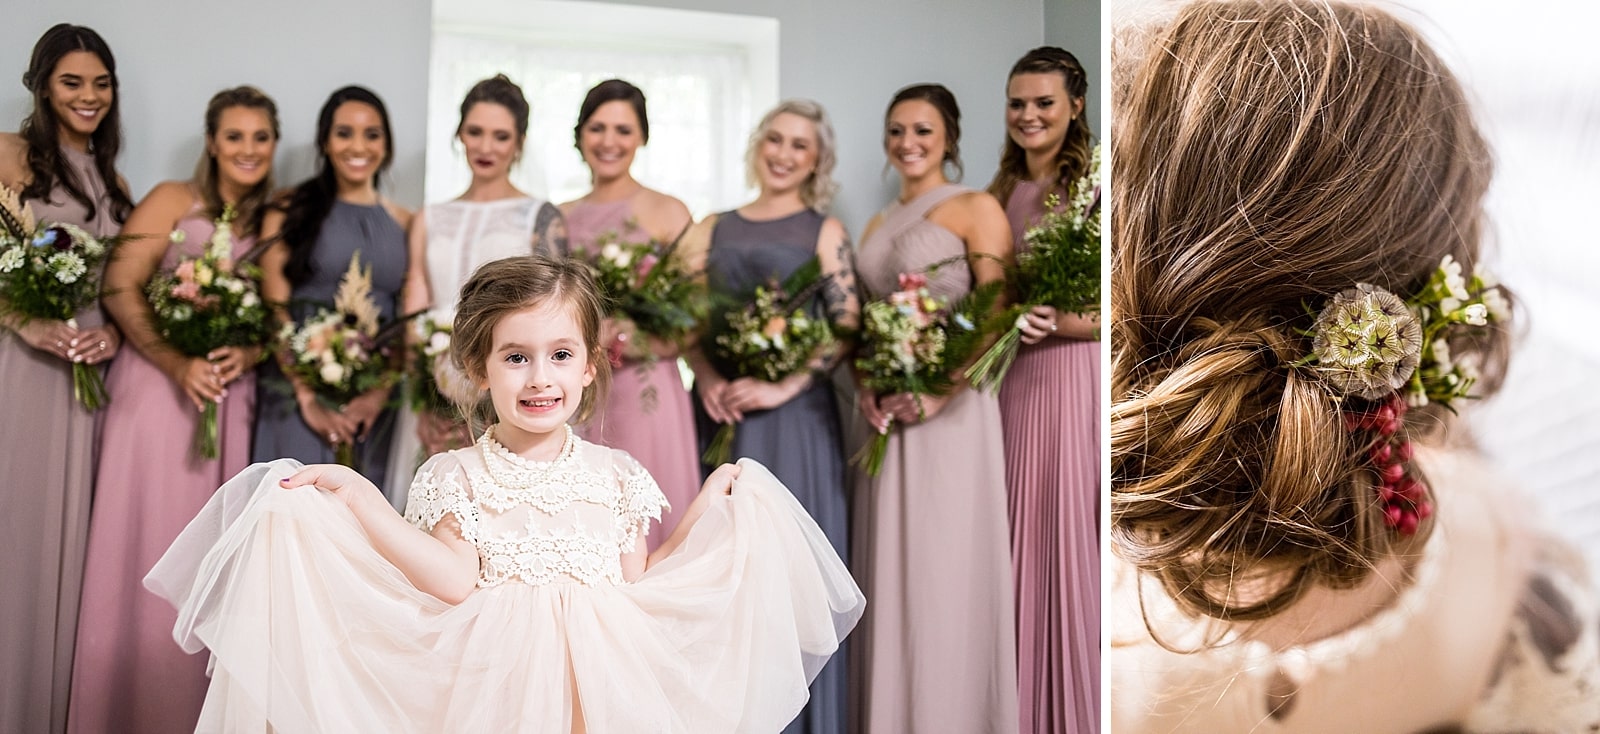 Flower girl curtseys during wedding party portraits with flowers in her hair